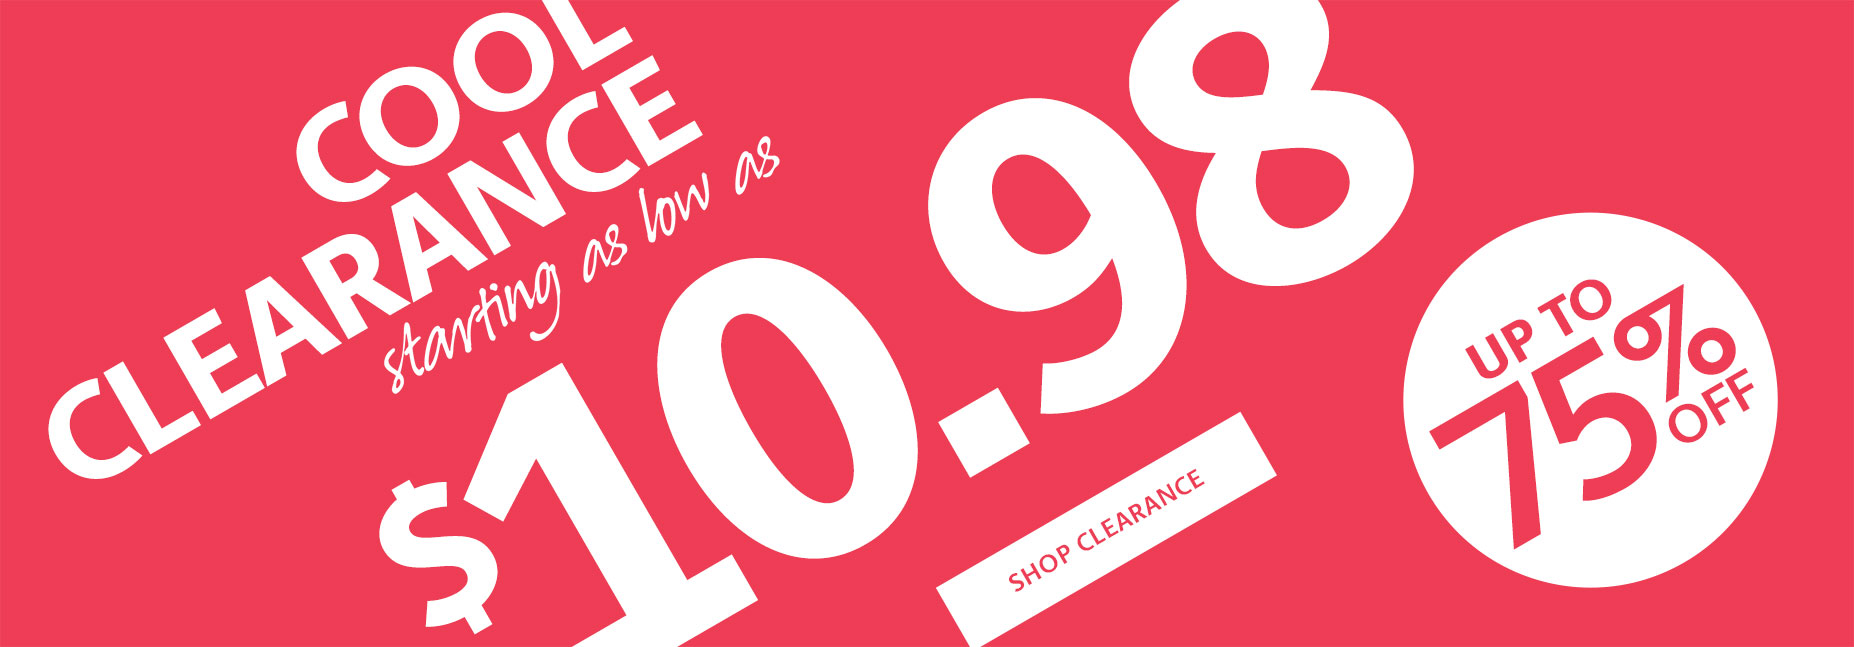 Clearance up to 75% Off